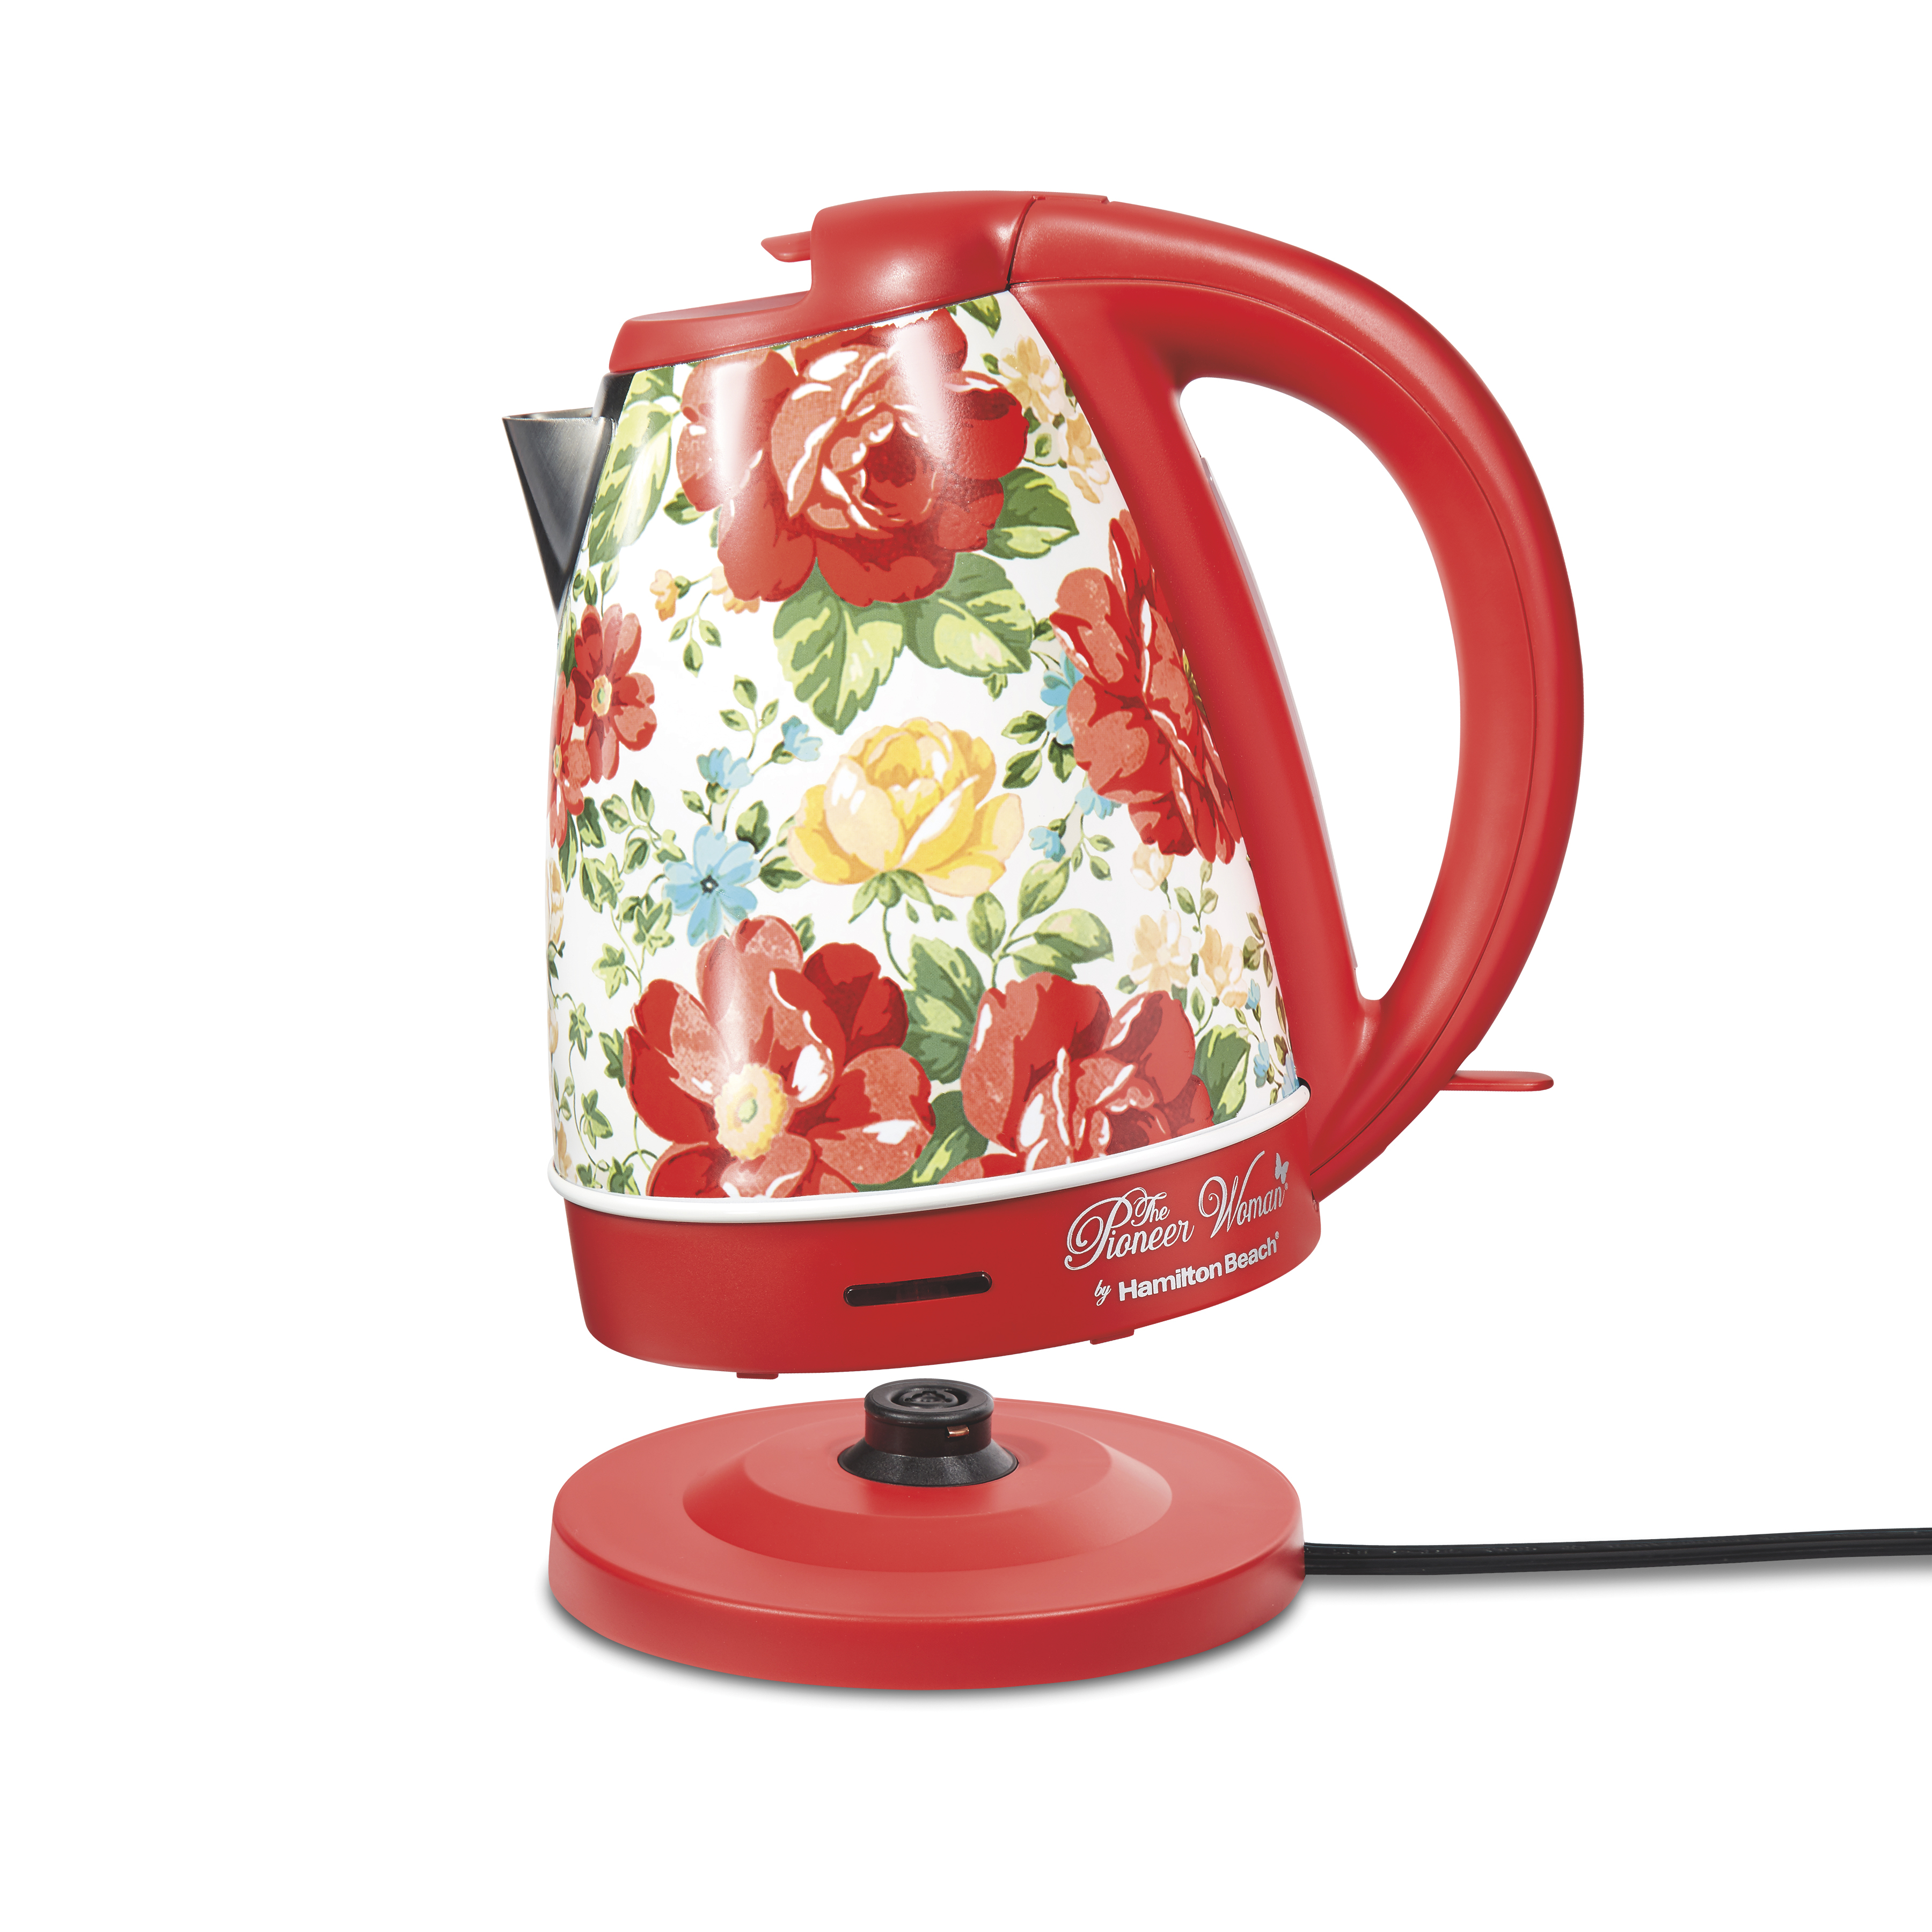 The Pioneer Woman 1.7 Liter Electric Kettle, Vintage Floral Red, 40970 - image 2 of 7